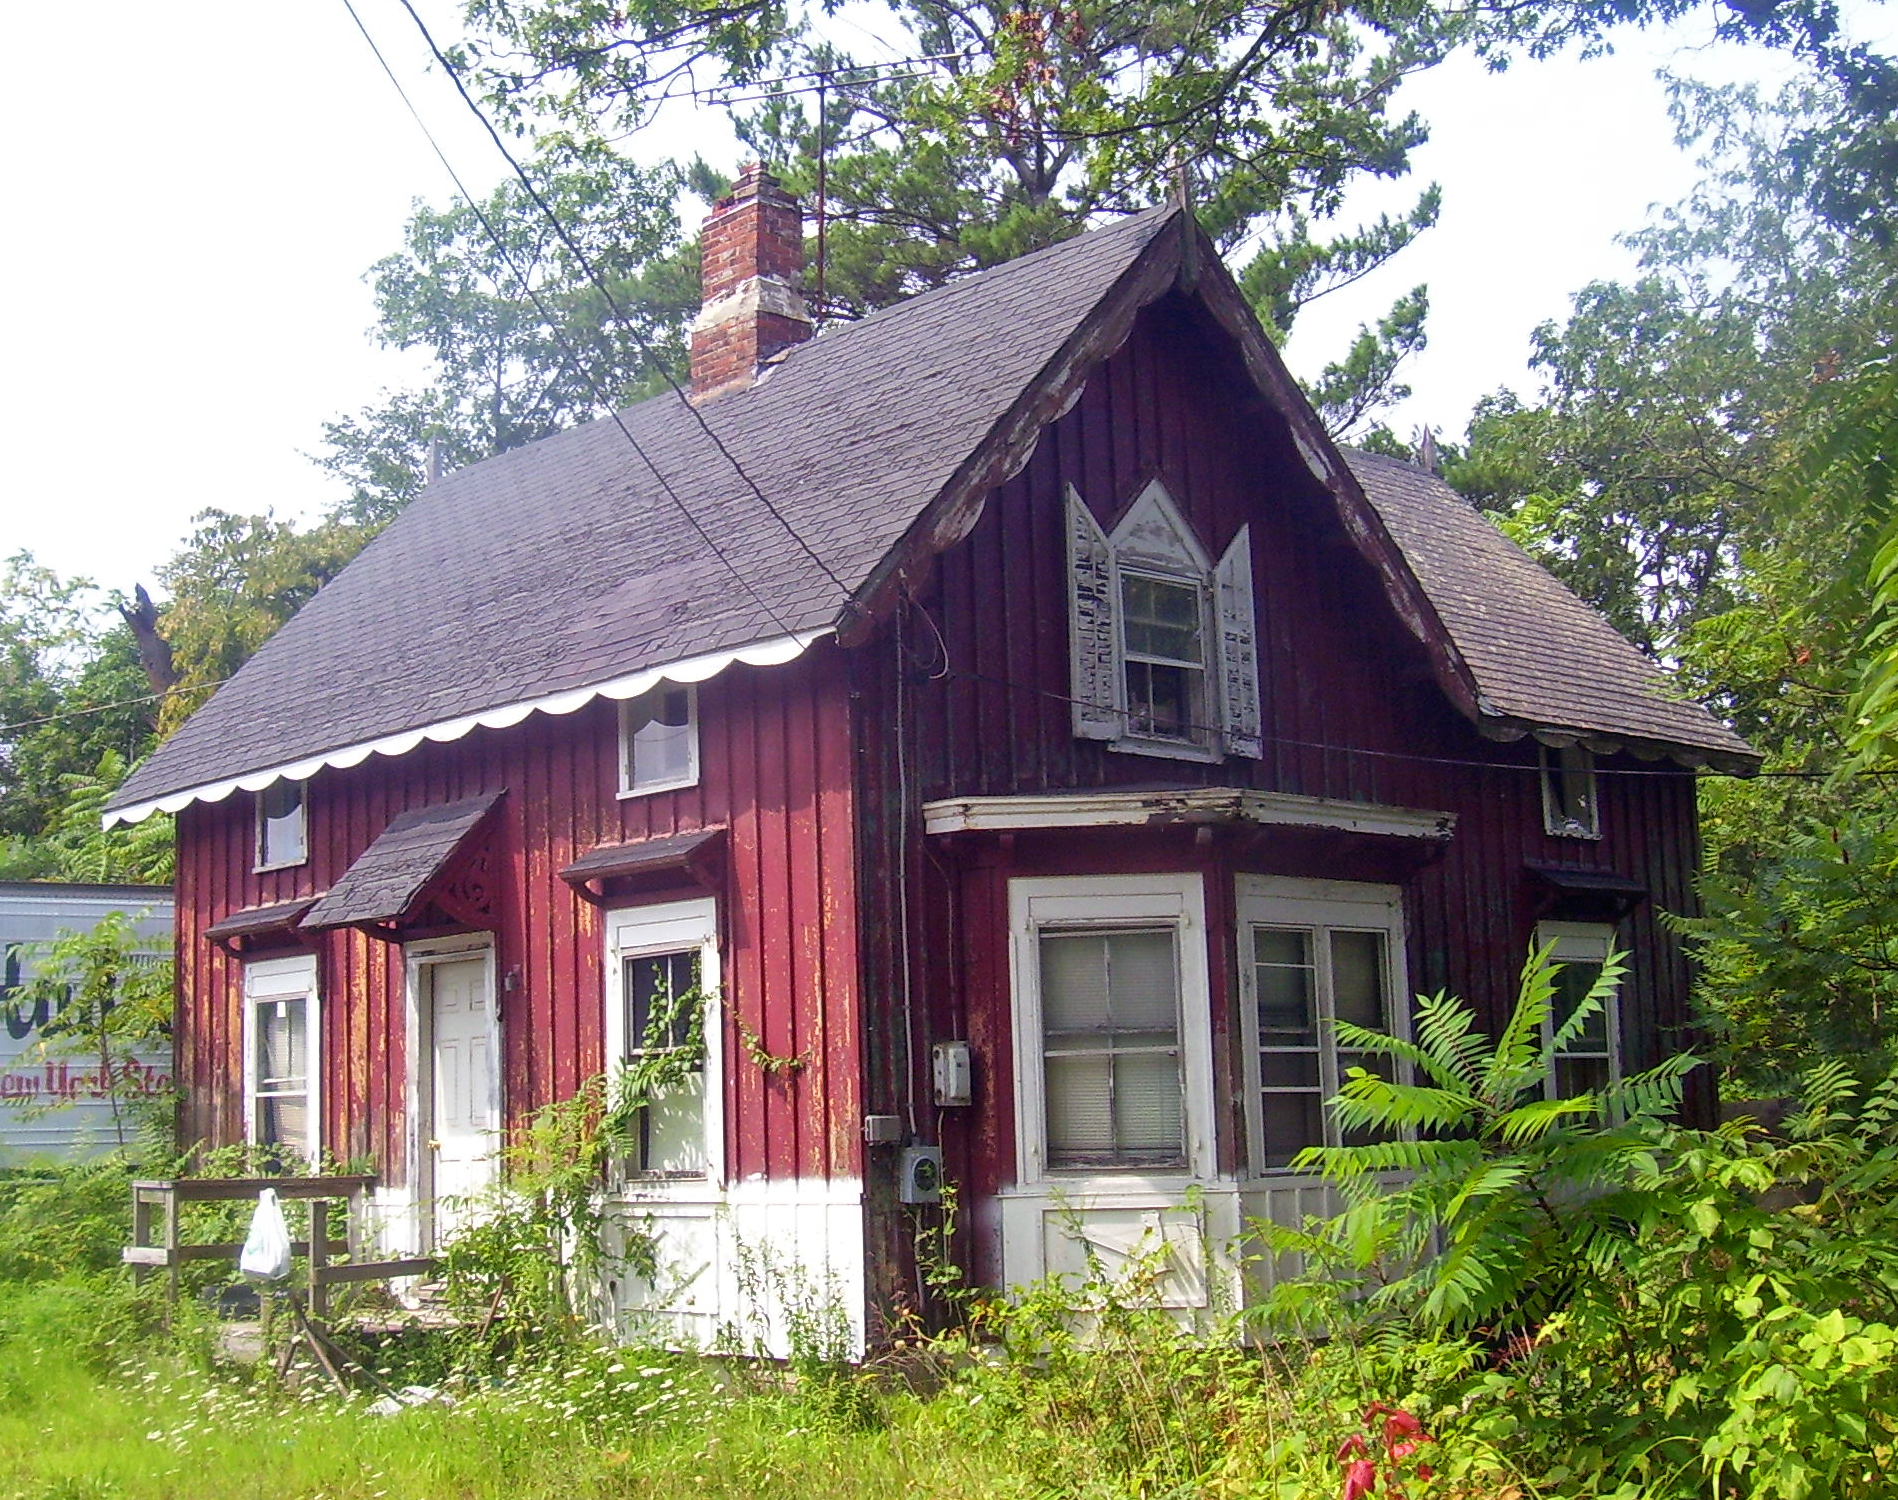 http://upload.wikimedia.org/wikipedia/commons/4/43/Roosevelt_Point_cottage,_Hyde_Park,_NY.jpg